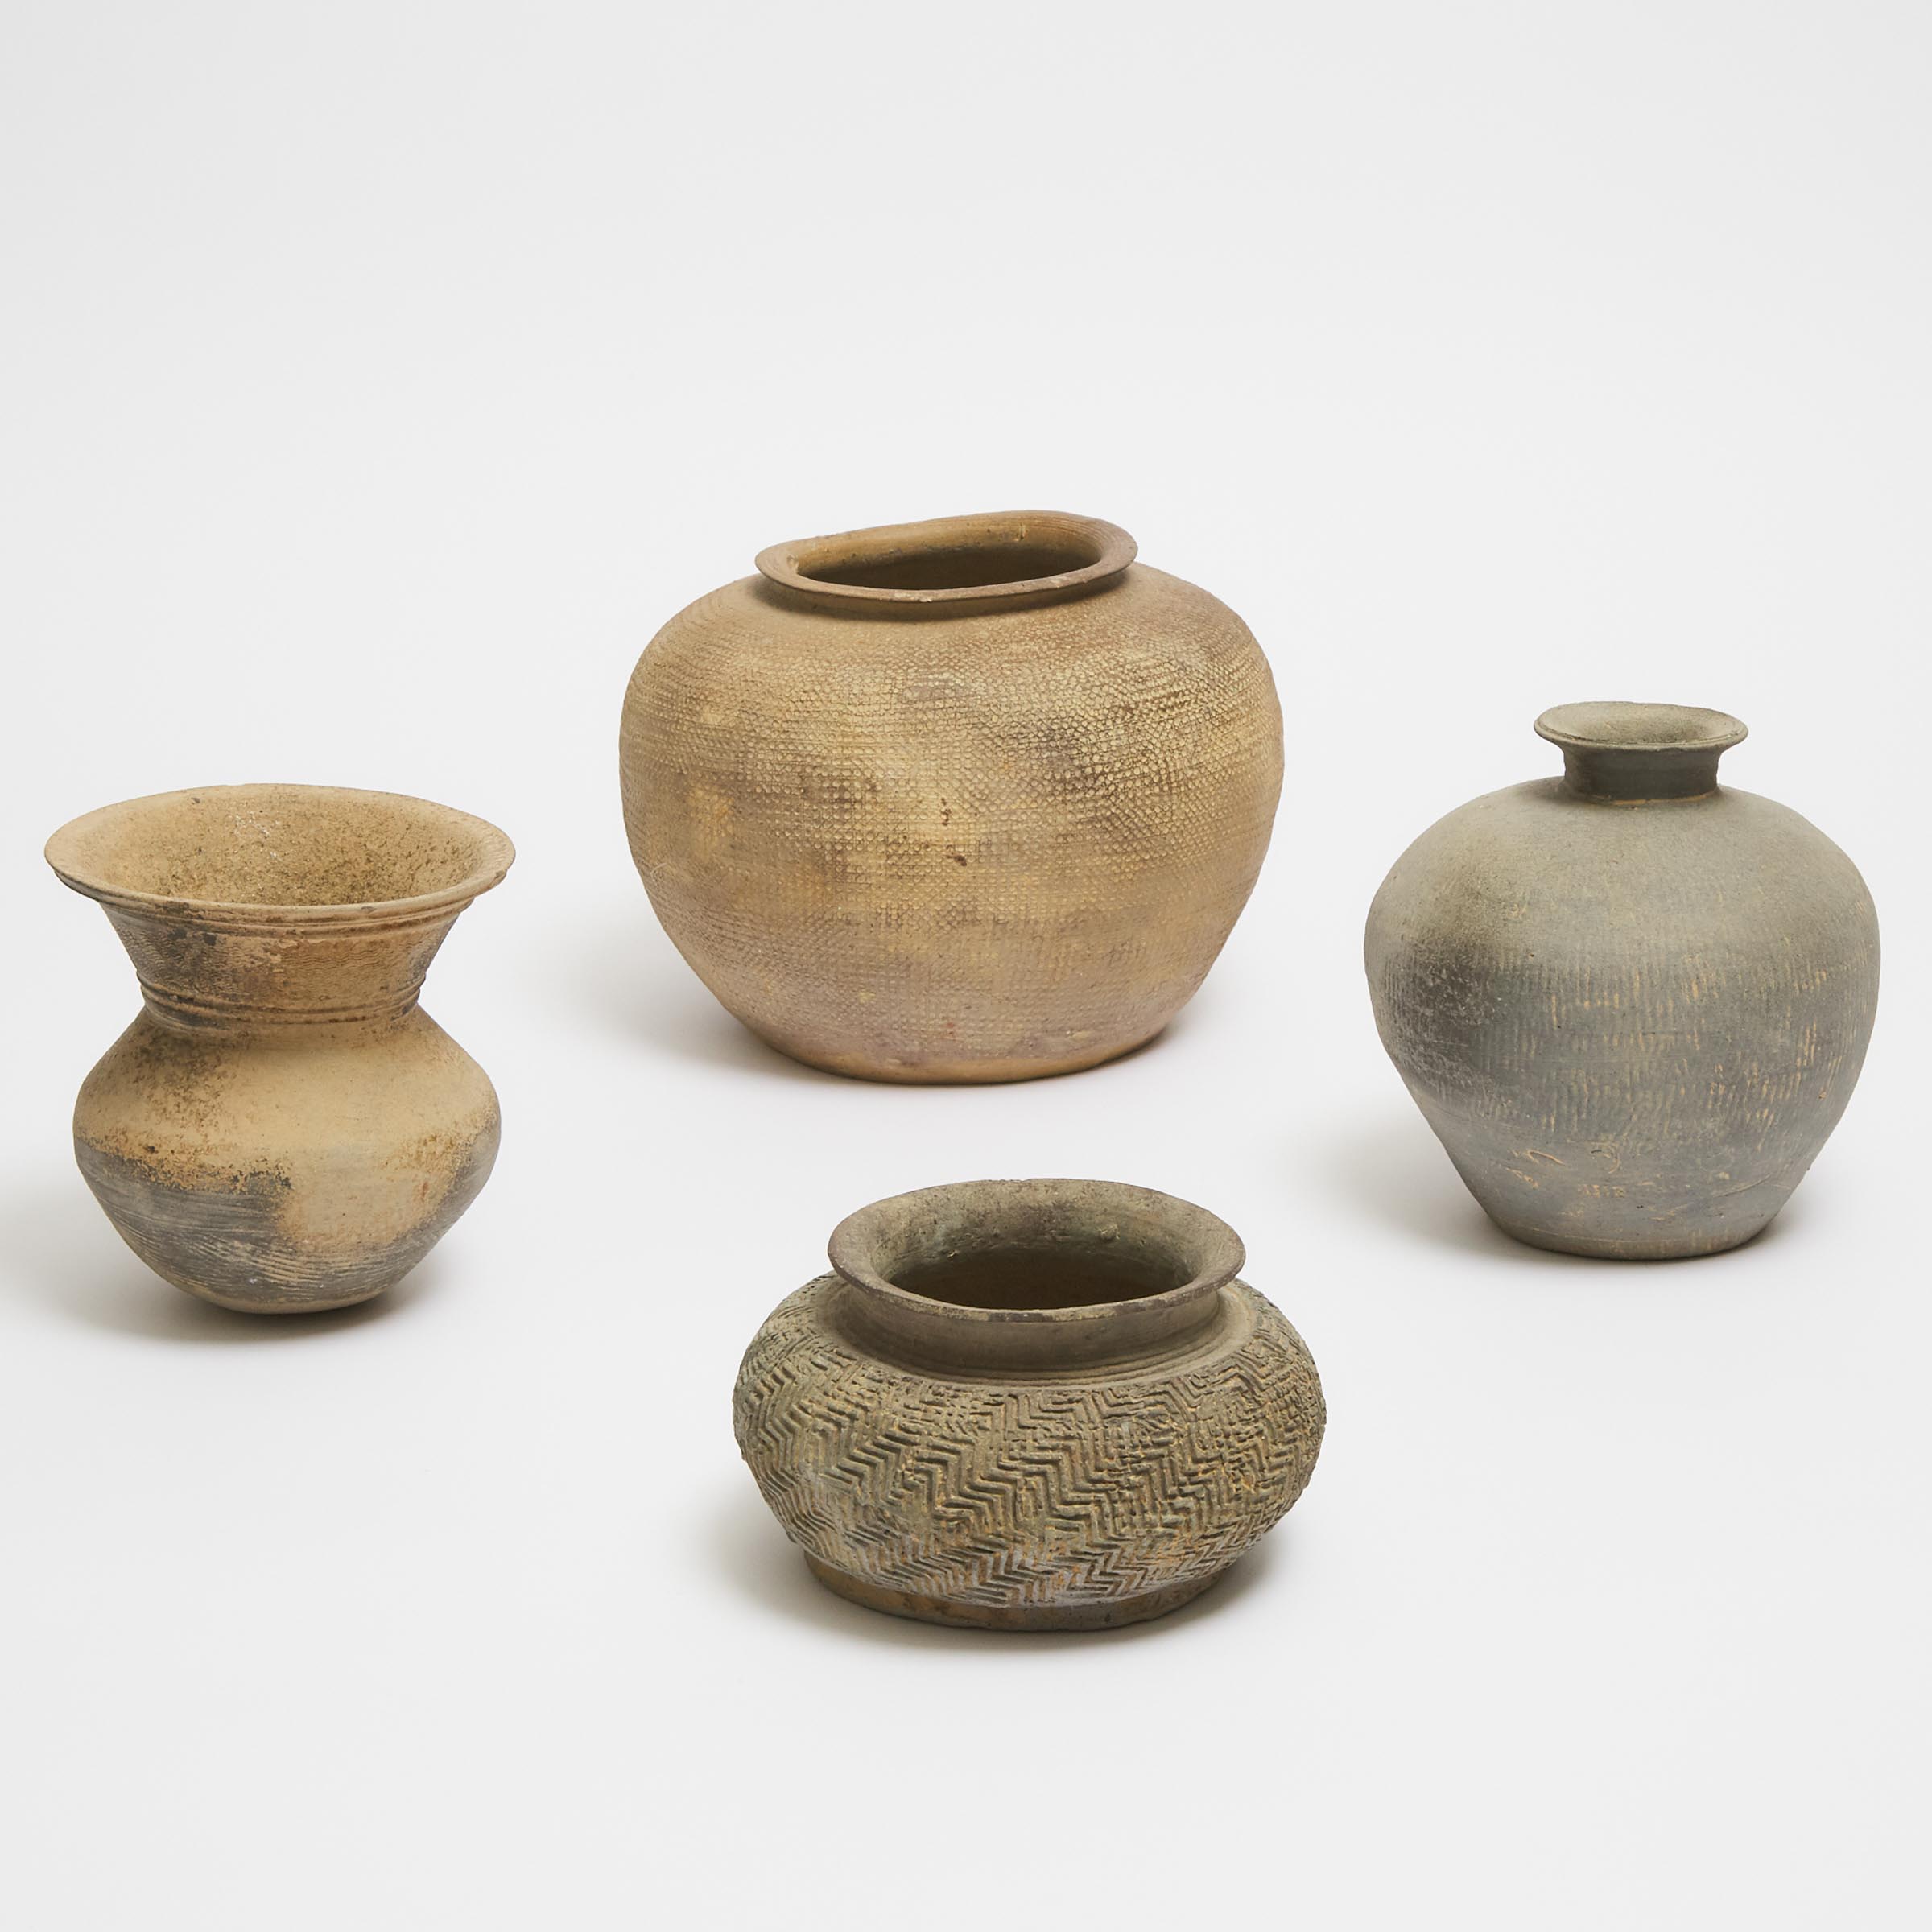 A Group of Four Pottery Vessels, Warring States Period (475-221 BC)